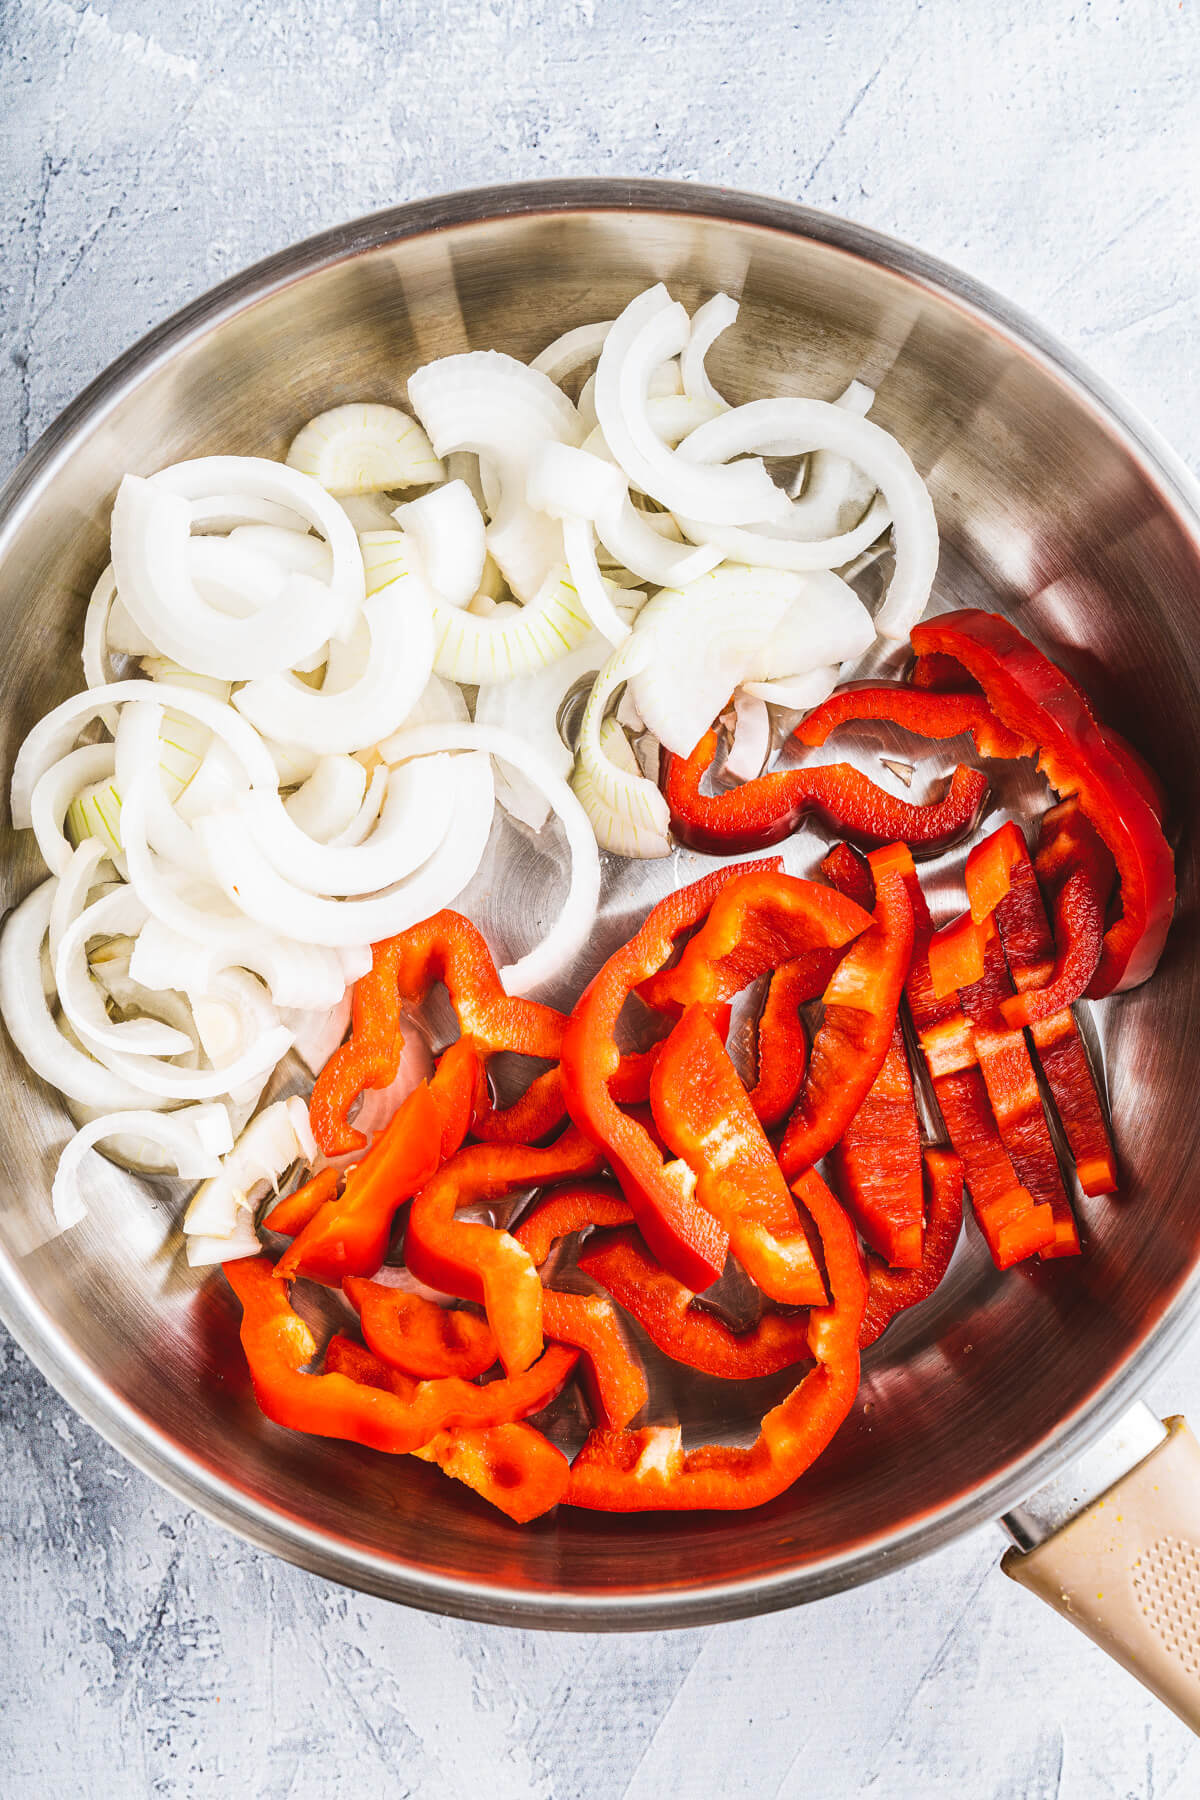 A frying pan containing strips of red bell pepper and sliced white onions.